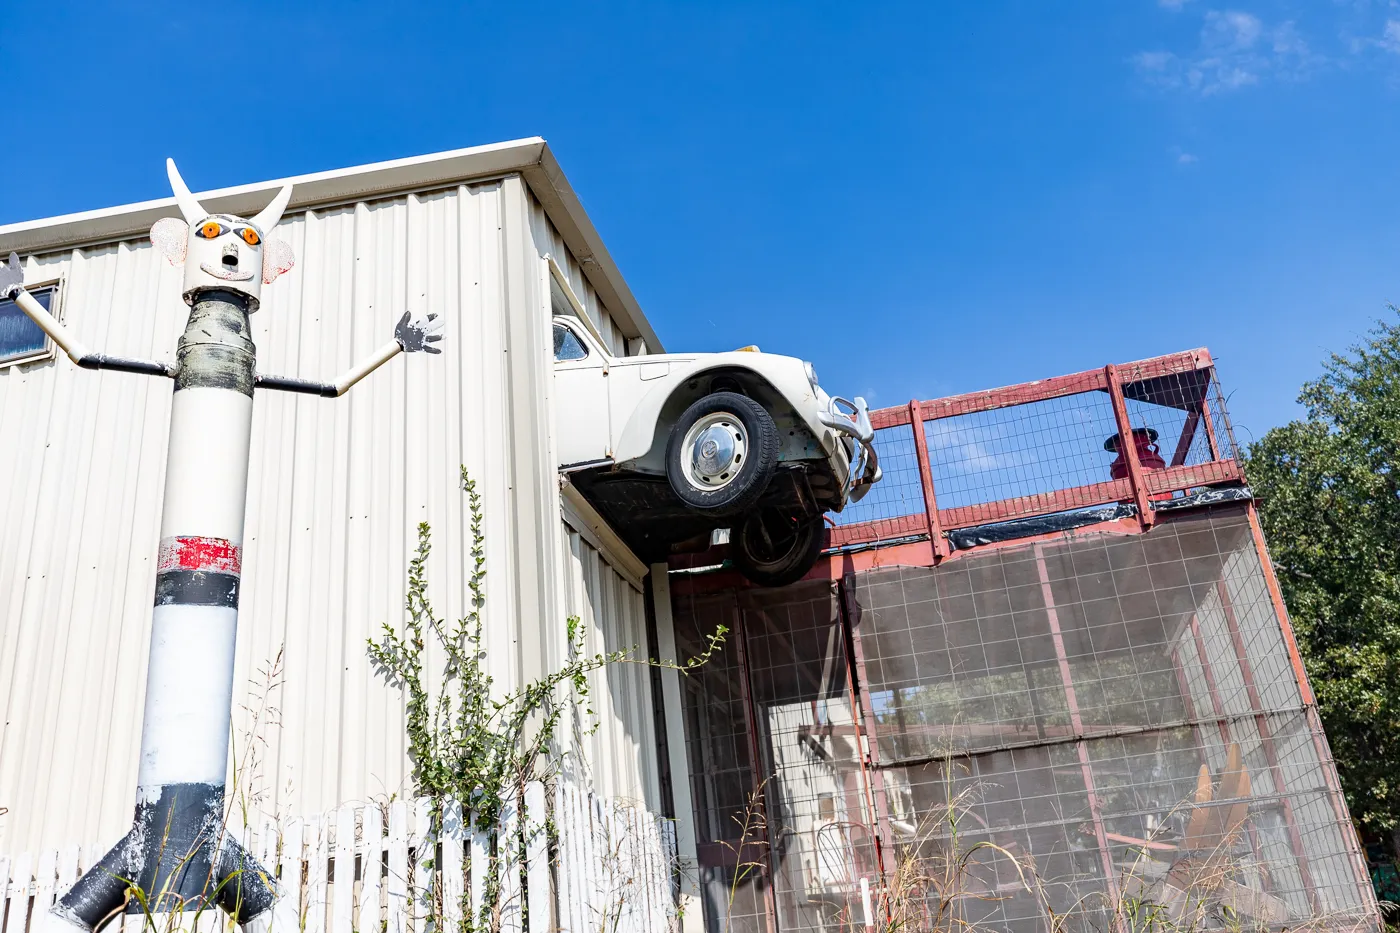 Car coming out of a building at OK County 66 - John's Place in Arcadia, Oklahoma - reproductions of famous Route 66 roadside attractions